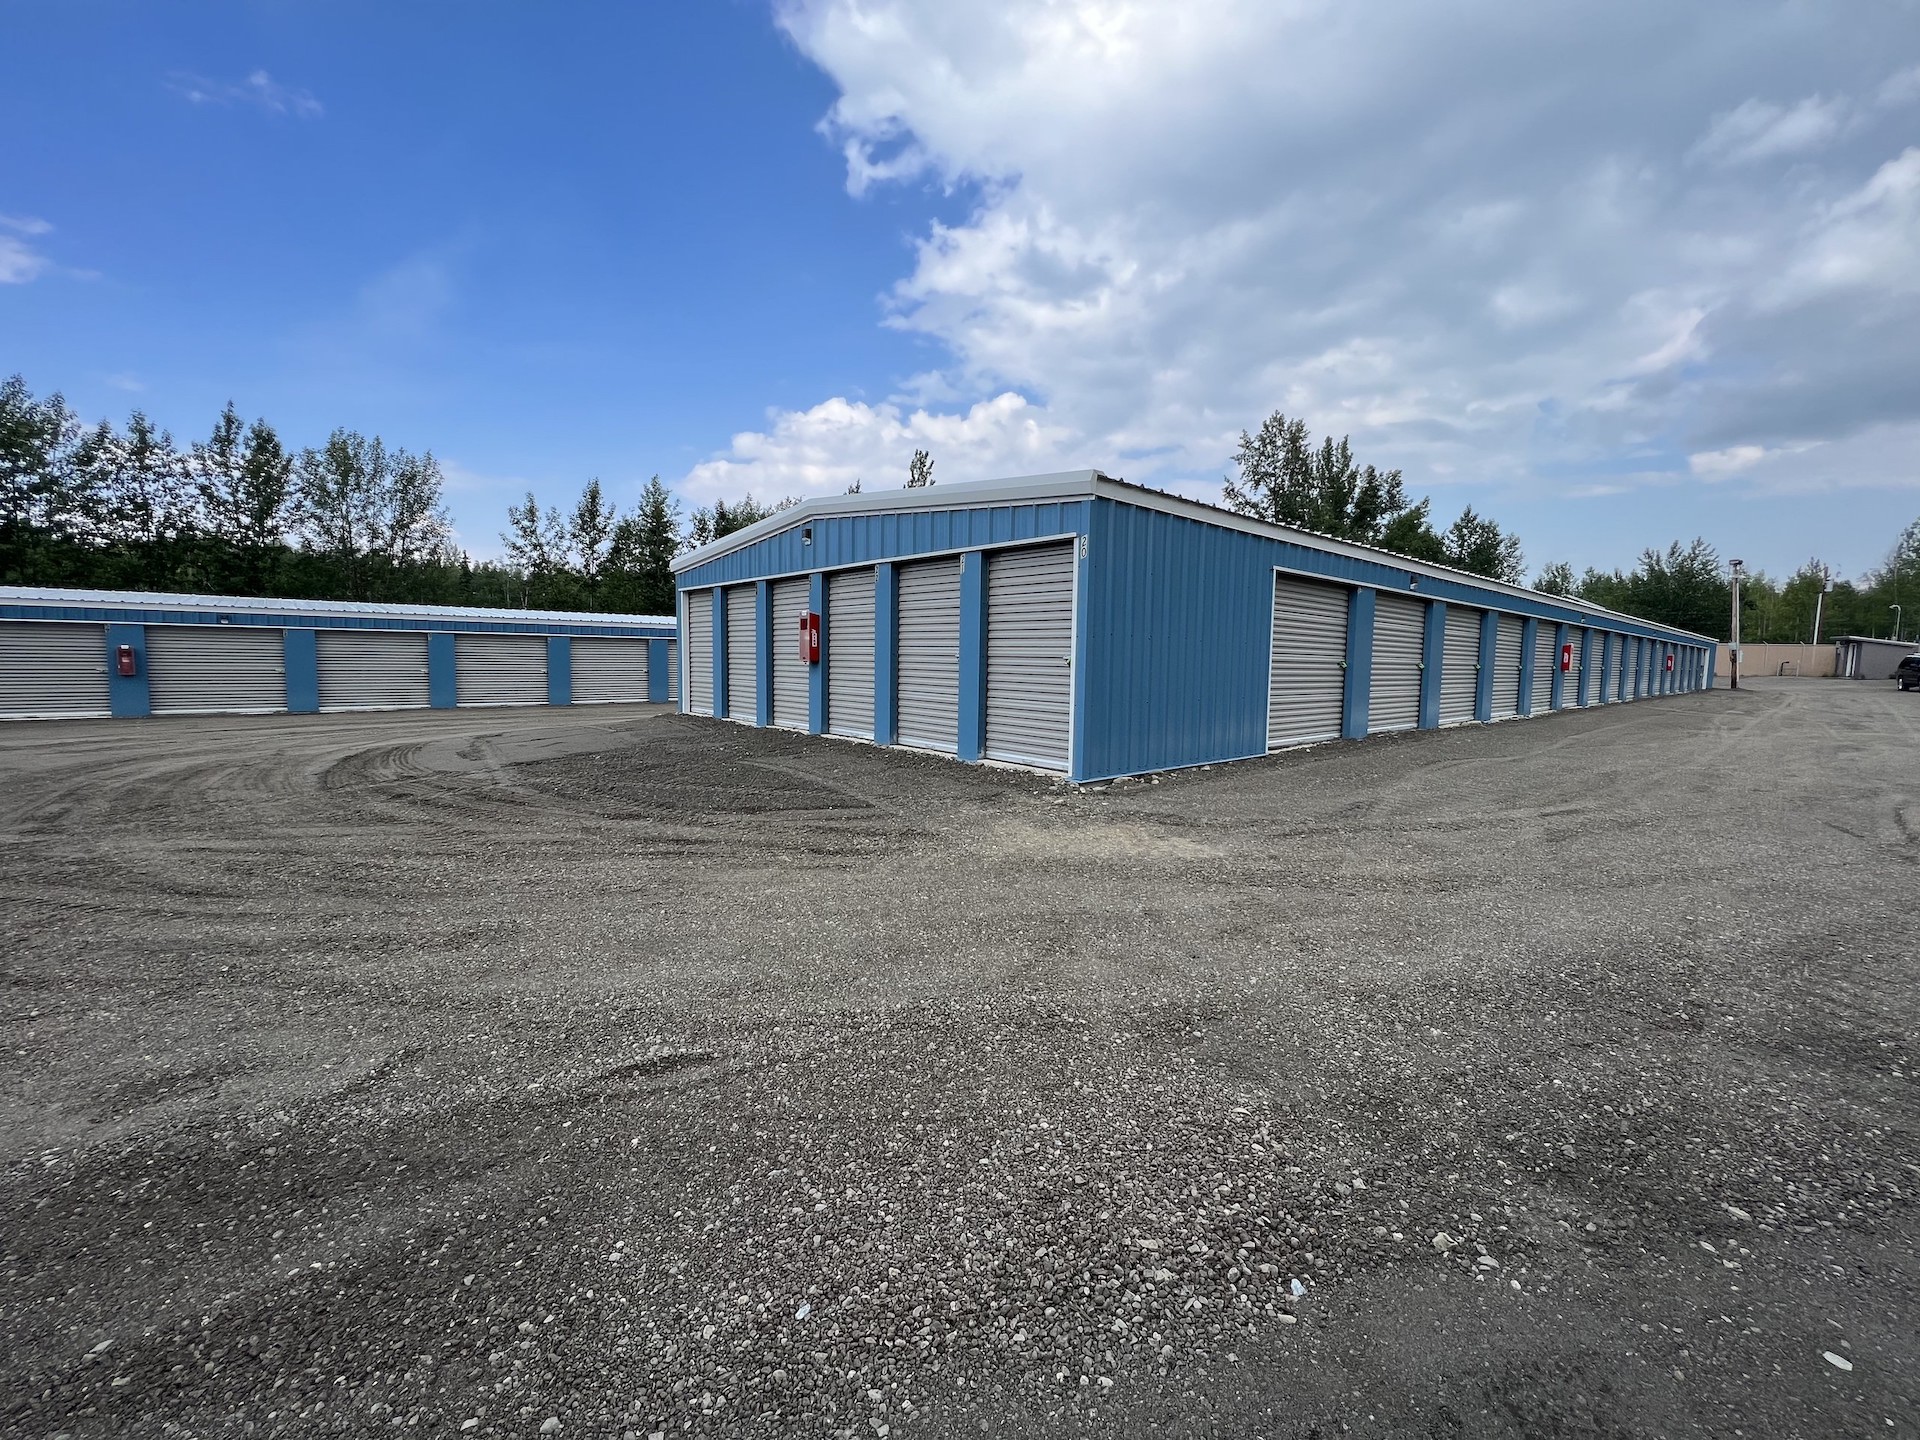 Store Your Extra Stuff At A Securely-Gated Storage Facility In Eagle River, AK